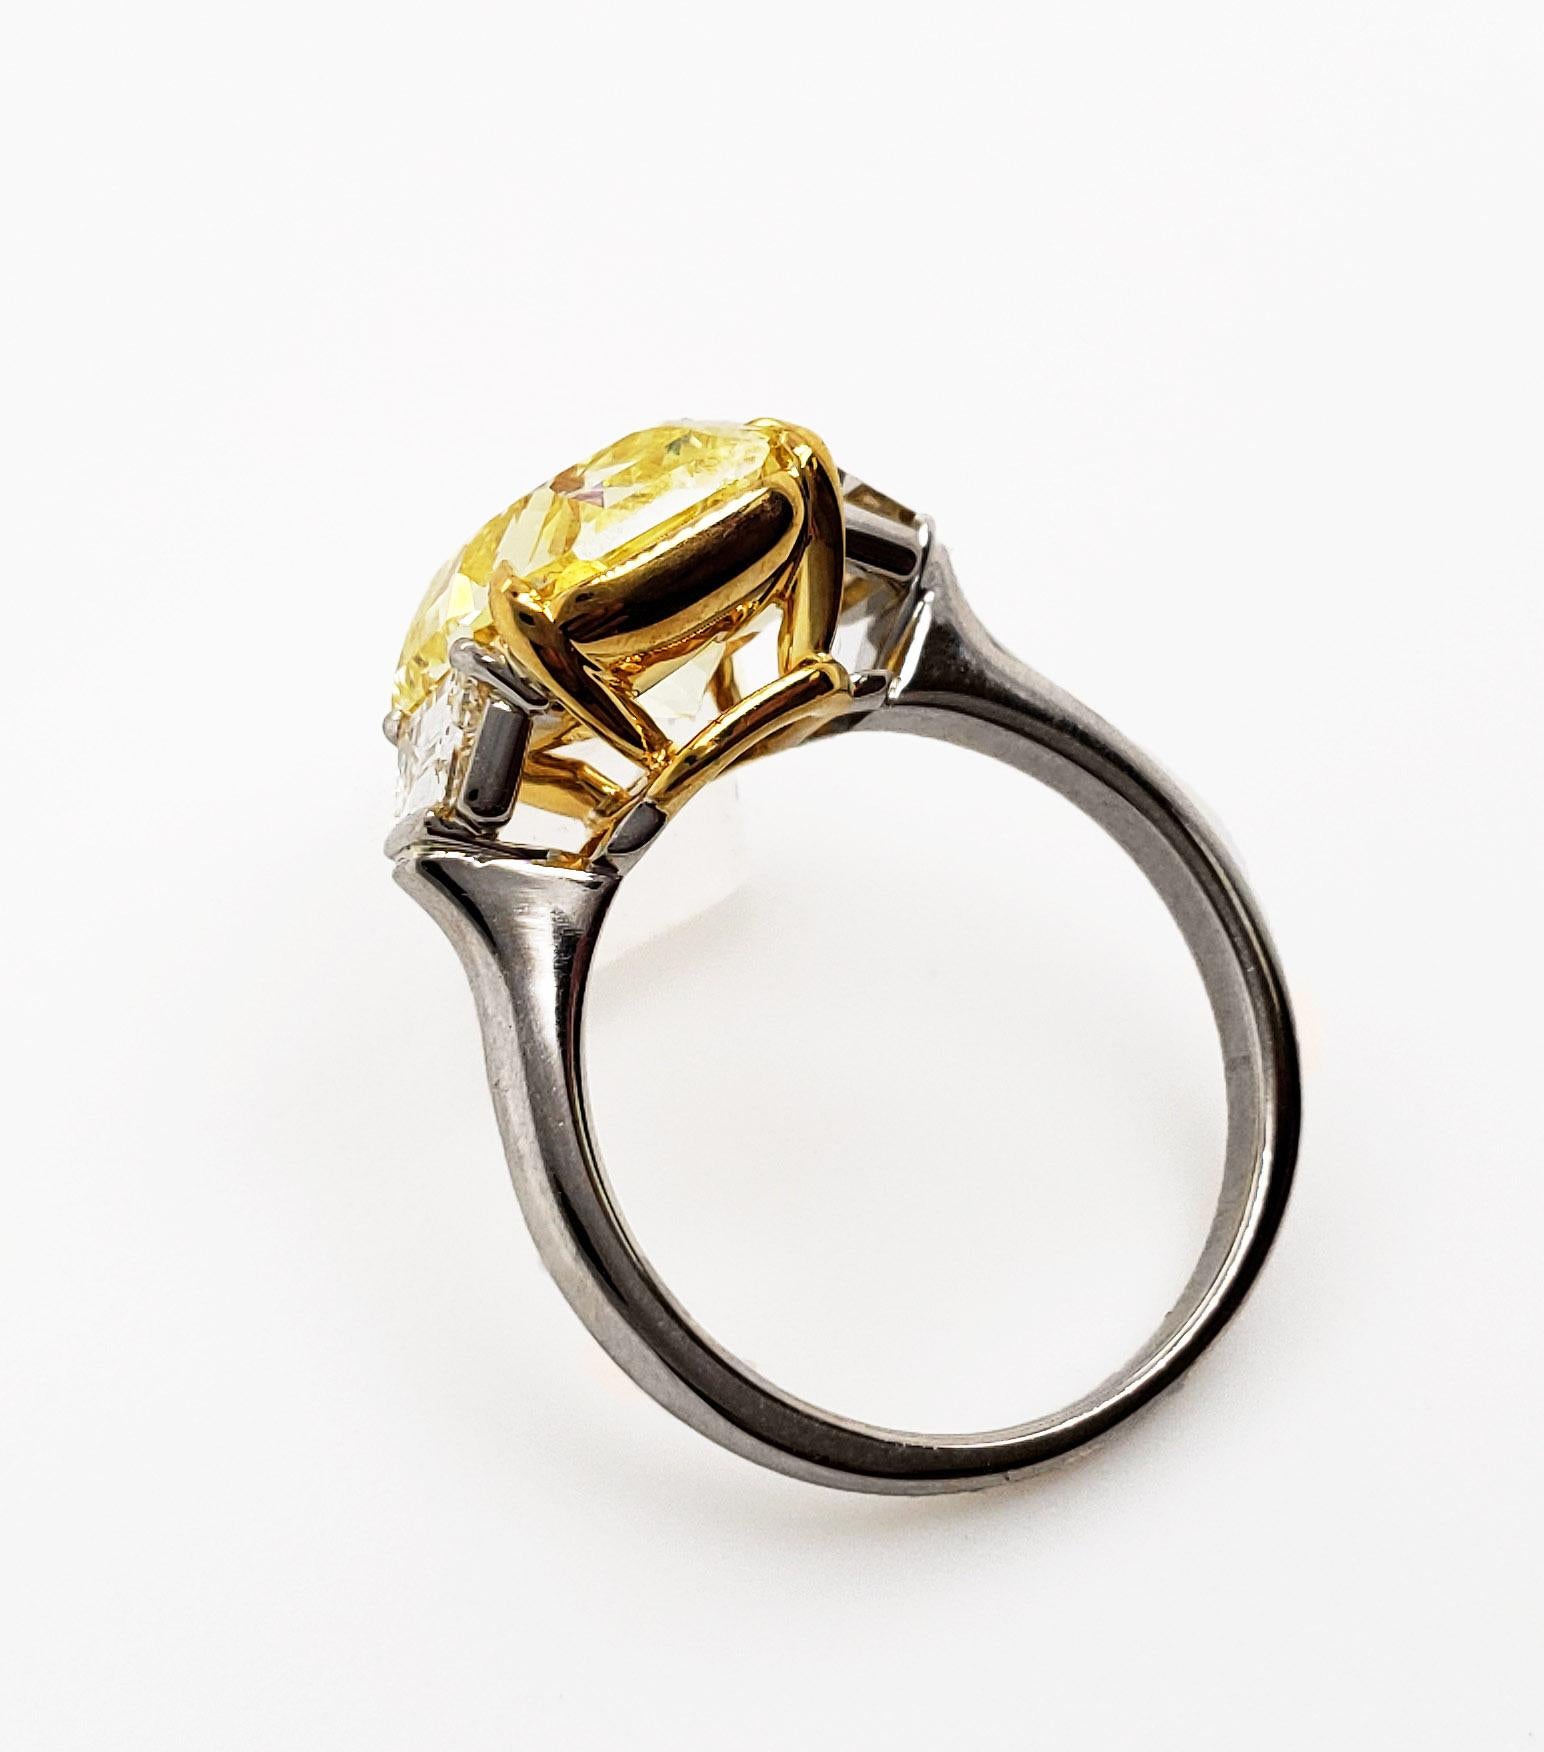 Contemporary Scarselli Ring 5 Carat Fancy Vivid Yellow Radiant Cut Diamond in Platinum For Sale